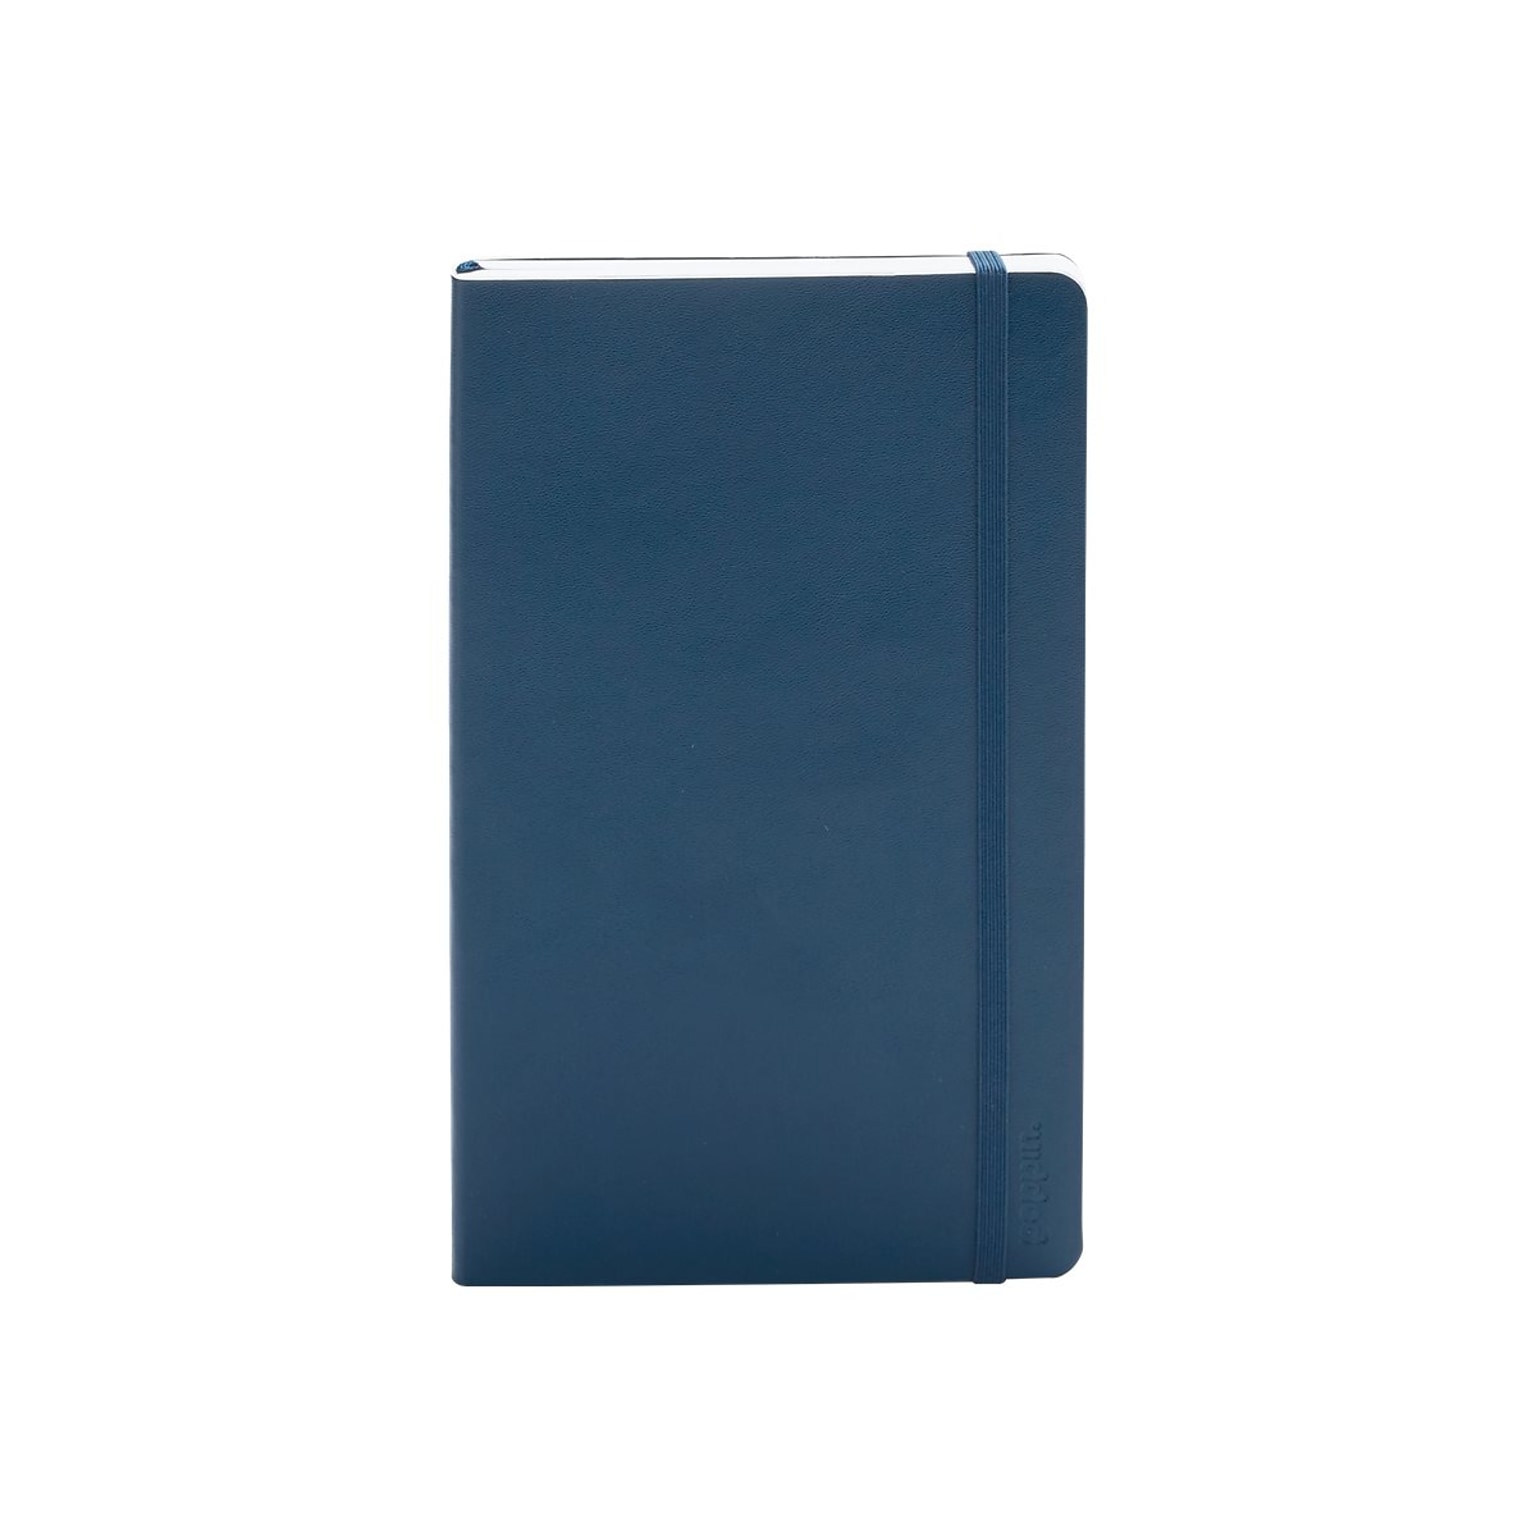 Poppin Professional Notebook, 5 x 8.25, College Ruled, 96 Sheets, Navy Blue (100358)